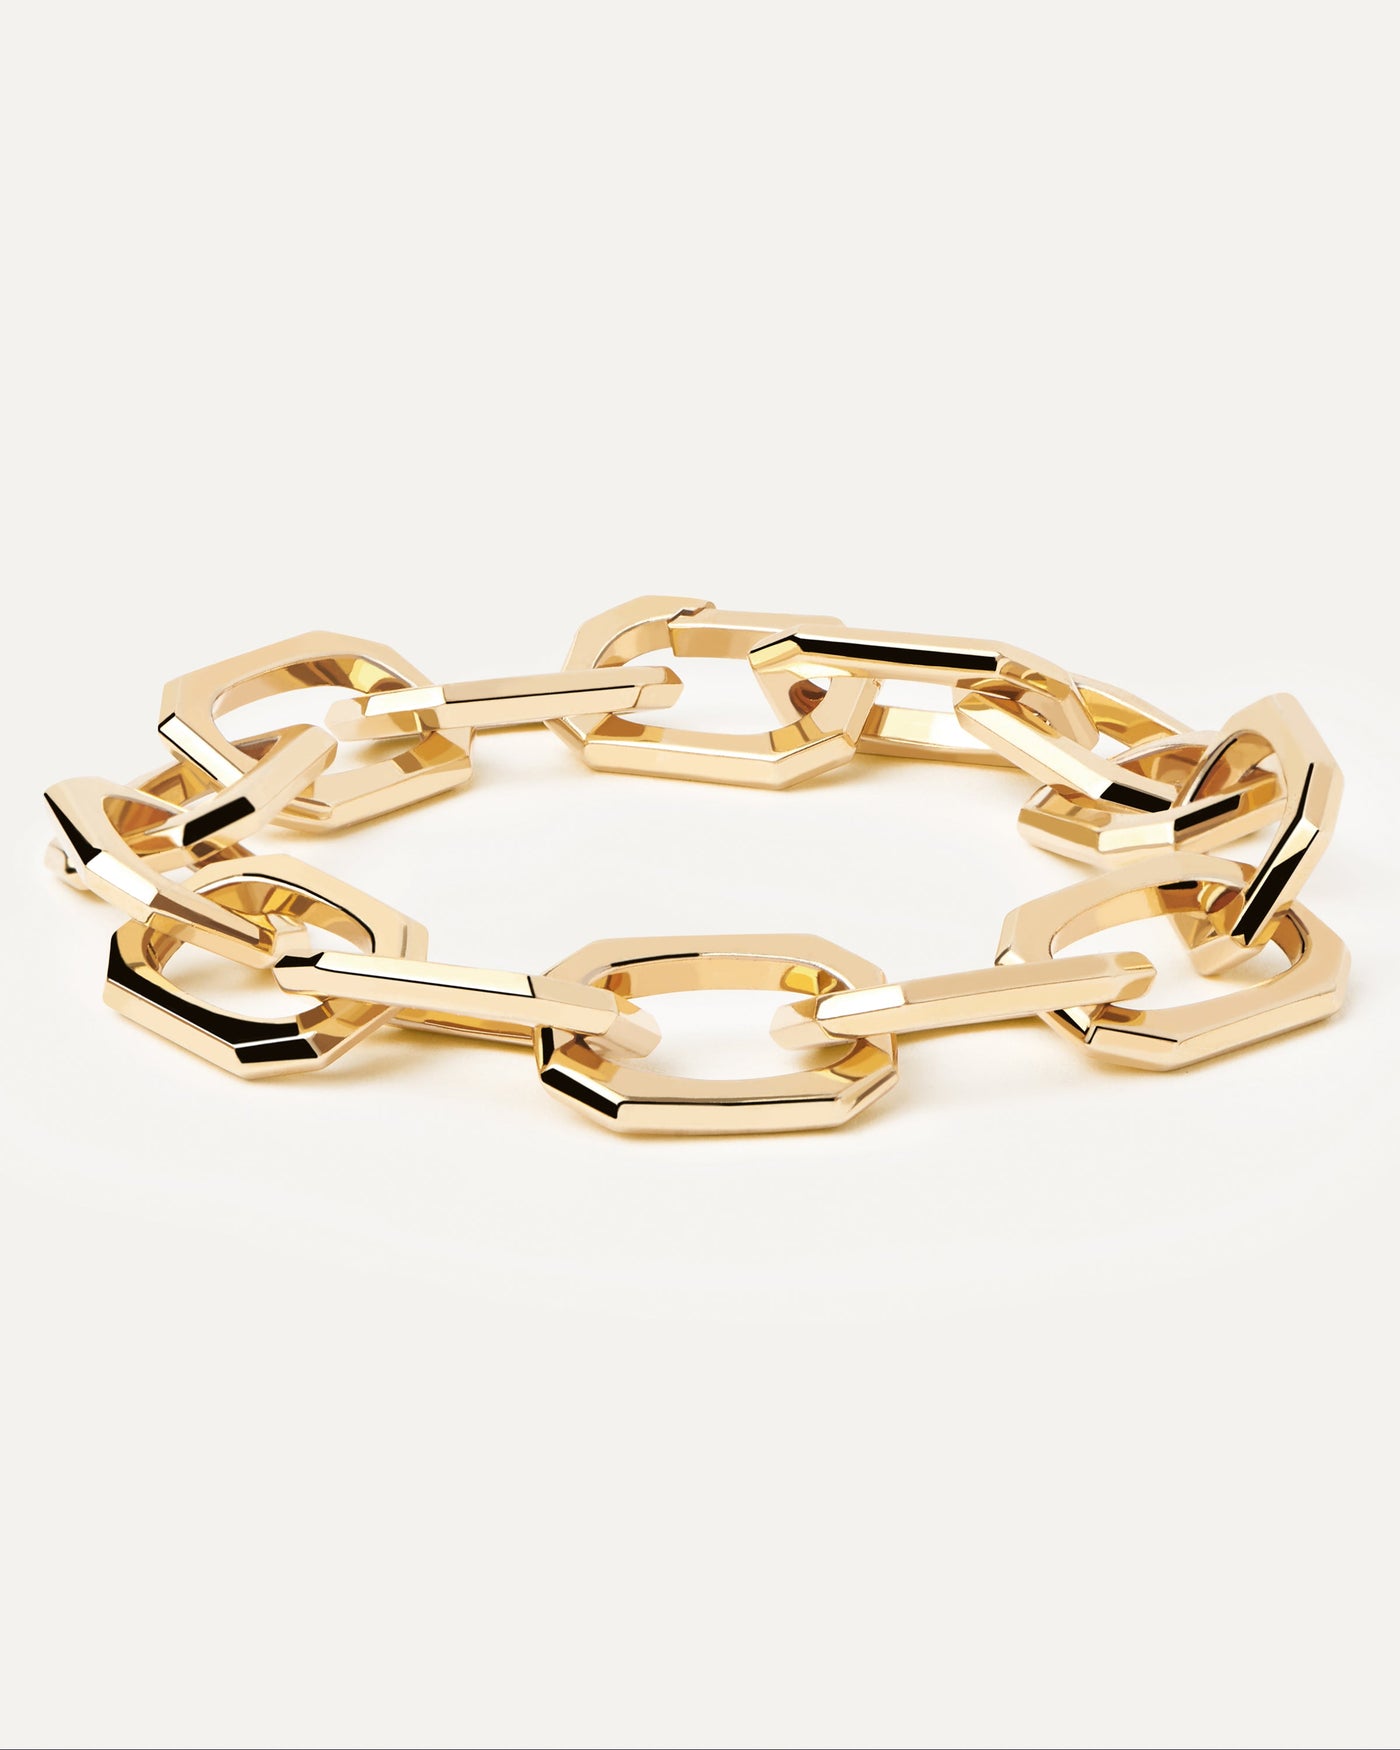 2023 Selection | Large Signature Chain Bracelet. Cable chain bracelet with big octogonal links in 18K gold plating. Get the latest arrival from PDPAOLA. Place your order safely and get this Best Seller. Free Shipping.